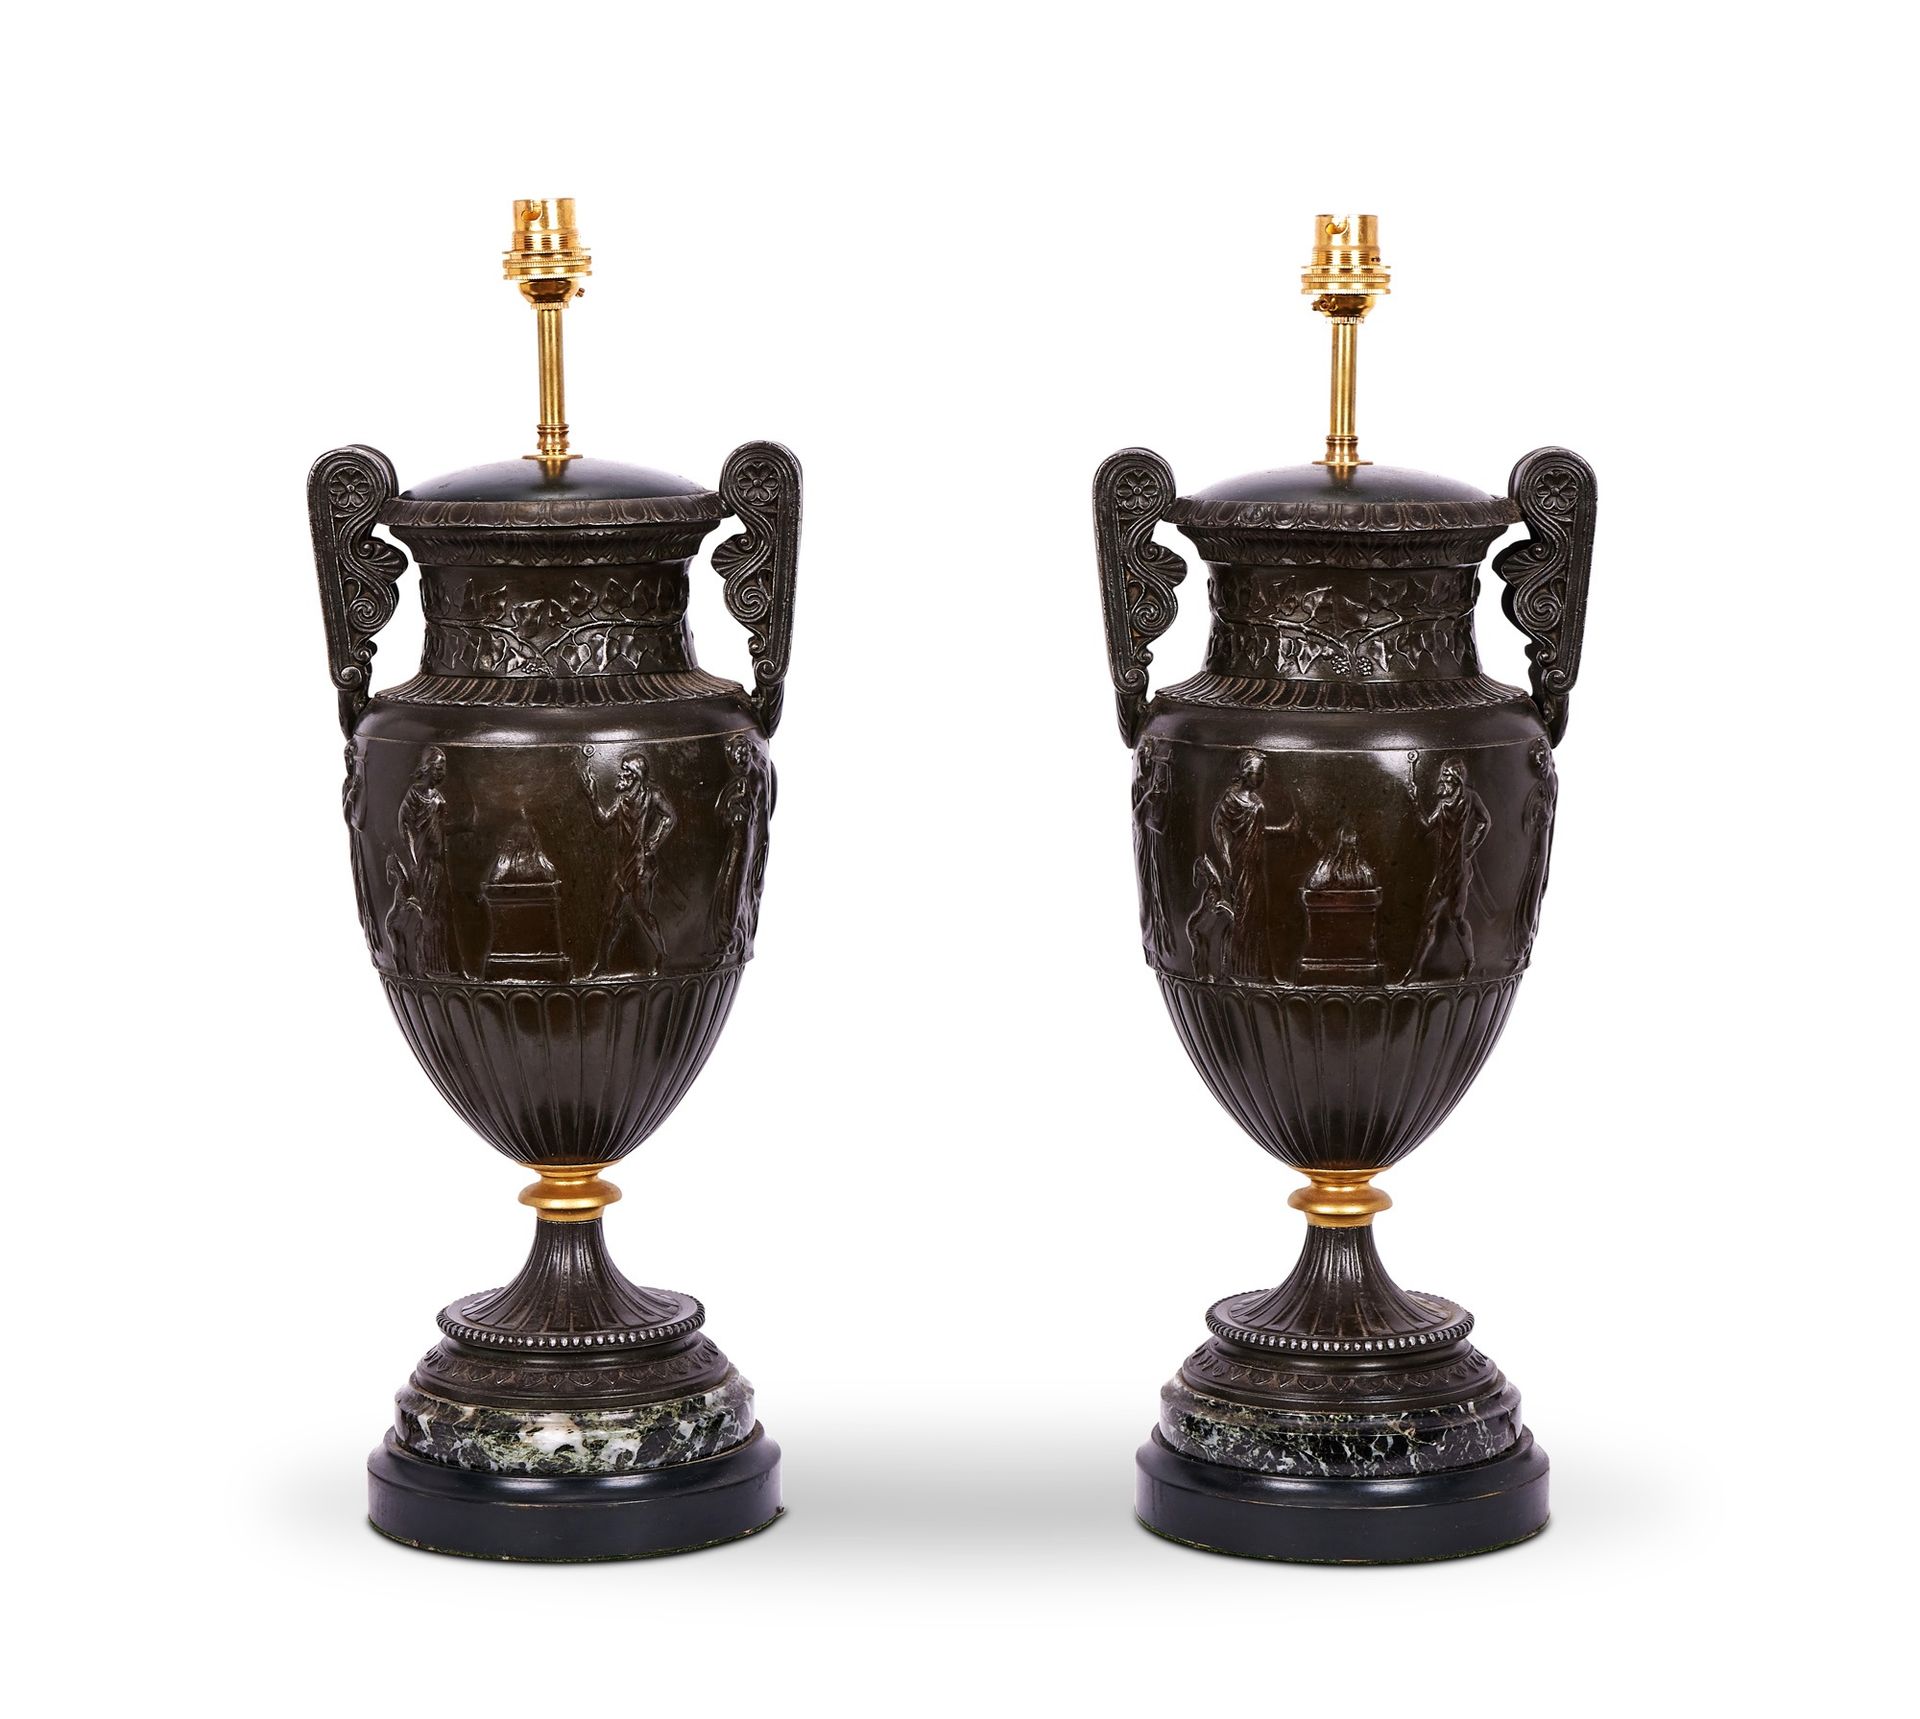 A PAIR OF 19TH CENTURY CLASSICAL STYLE LAMP BASES EIN PAAR KLASSIZISTISCHE LAMPE&hellip;